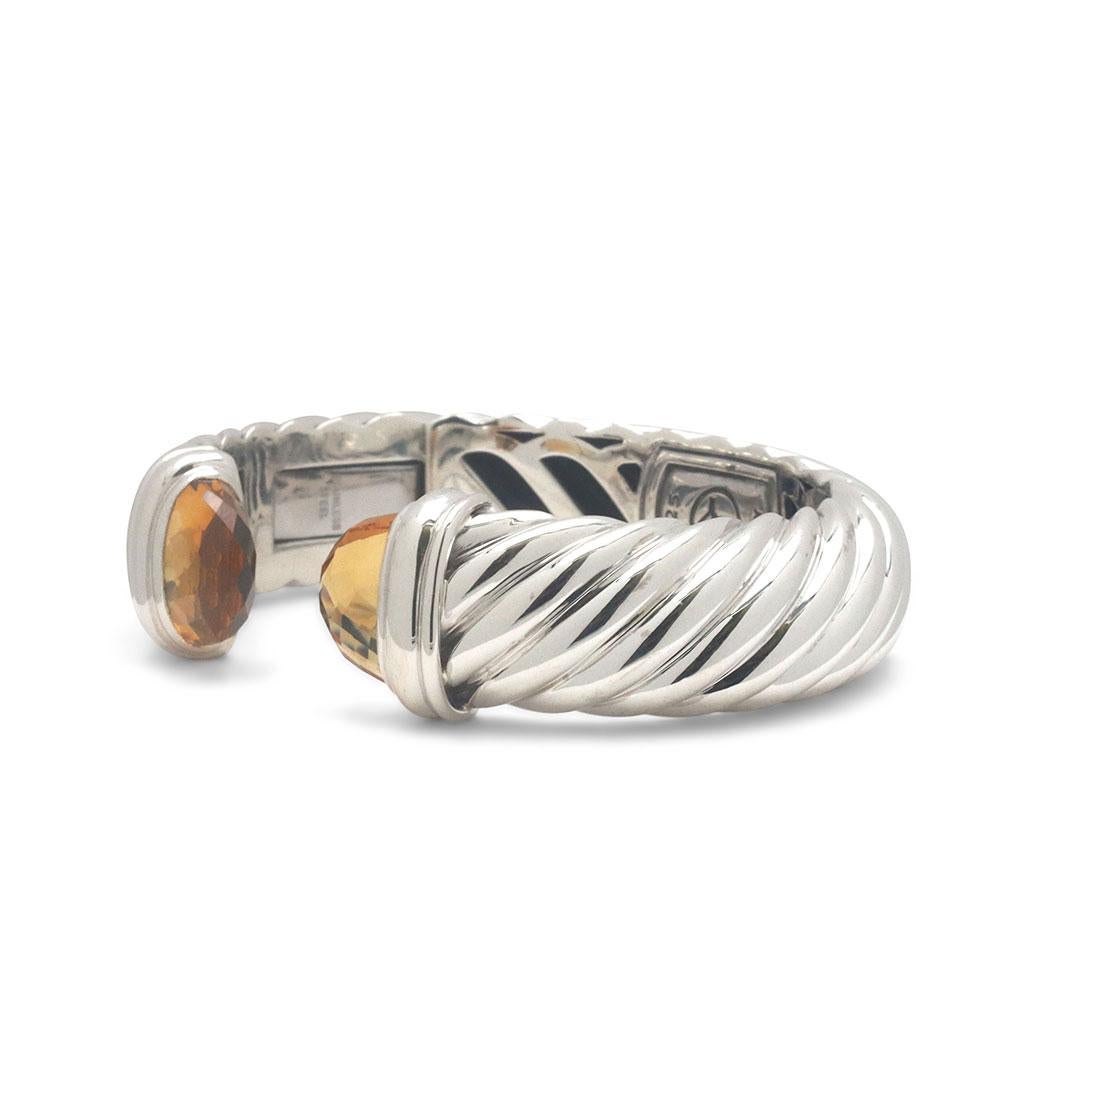 Authentic David Yurman Cable silver bangle bracelet, crafted in sterling silver. Featuring two faceted citrine stones on each end of the split bracelet. Fits up to a 51/2 inch wrist. Signed D.Y., 925. CIRCA 2000s

Brand: David Yurman
Collection: